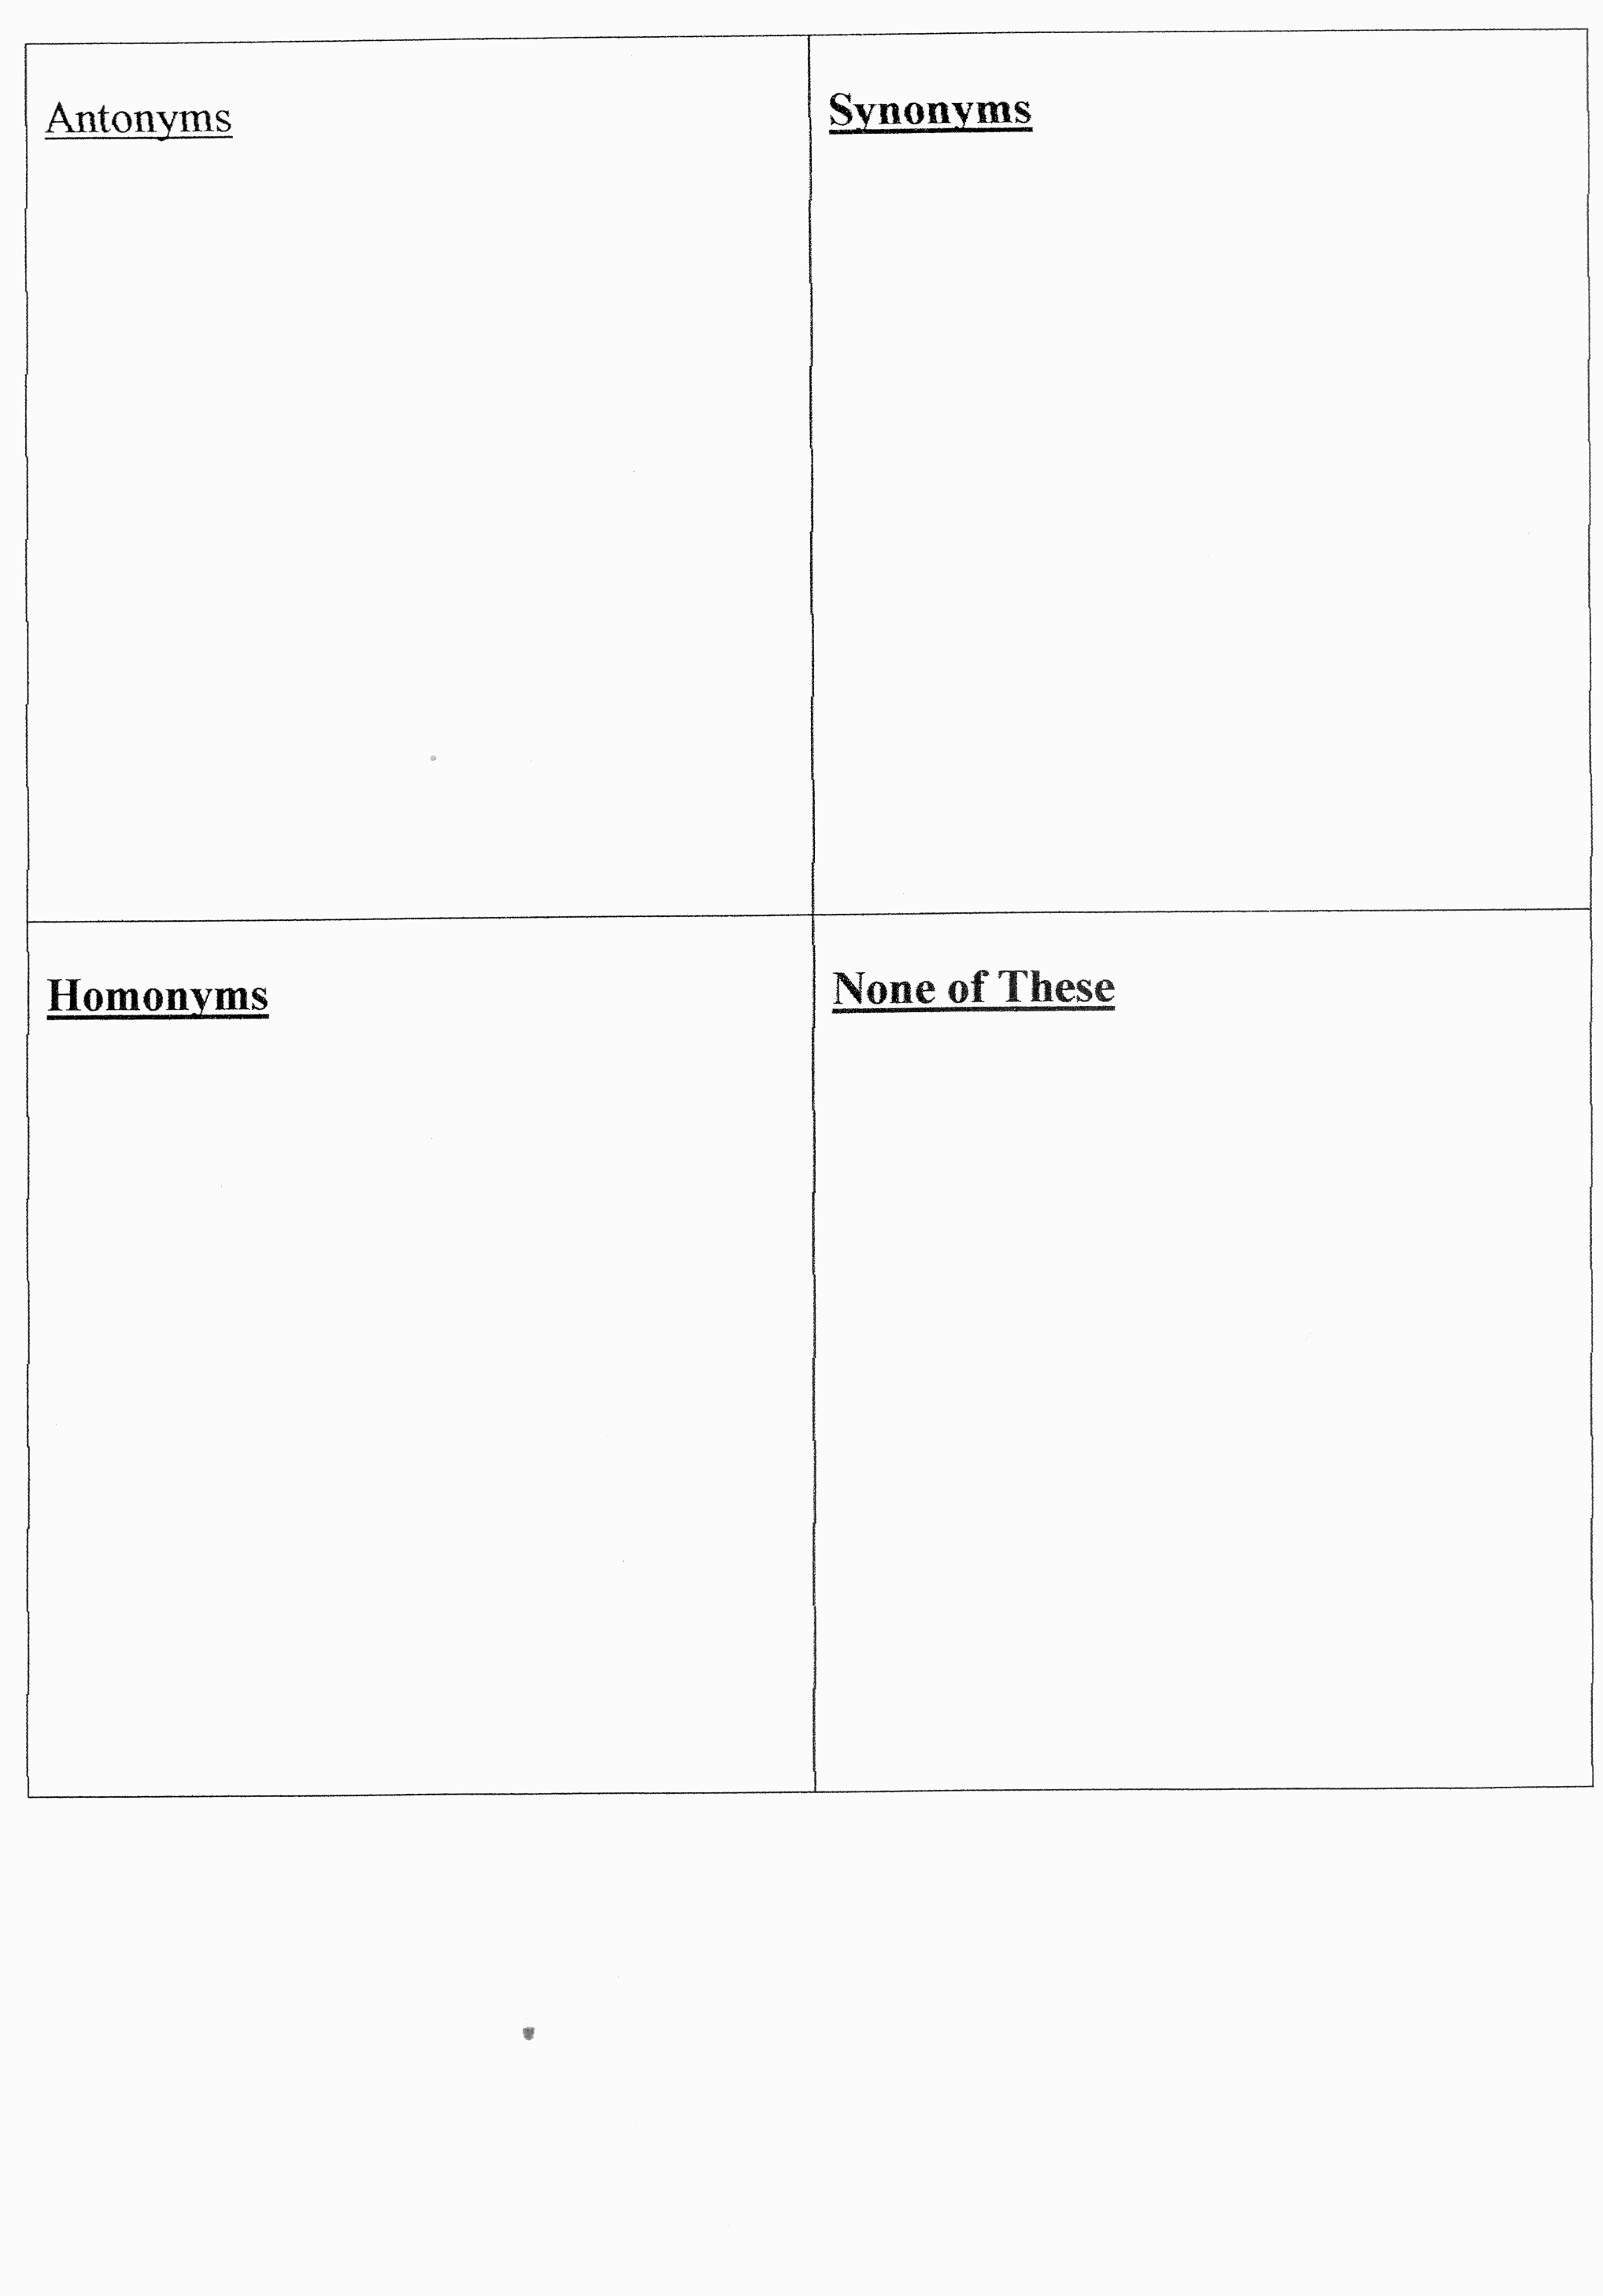 Synonyms and Antonyms Worksheet Middle School Image